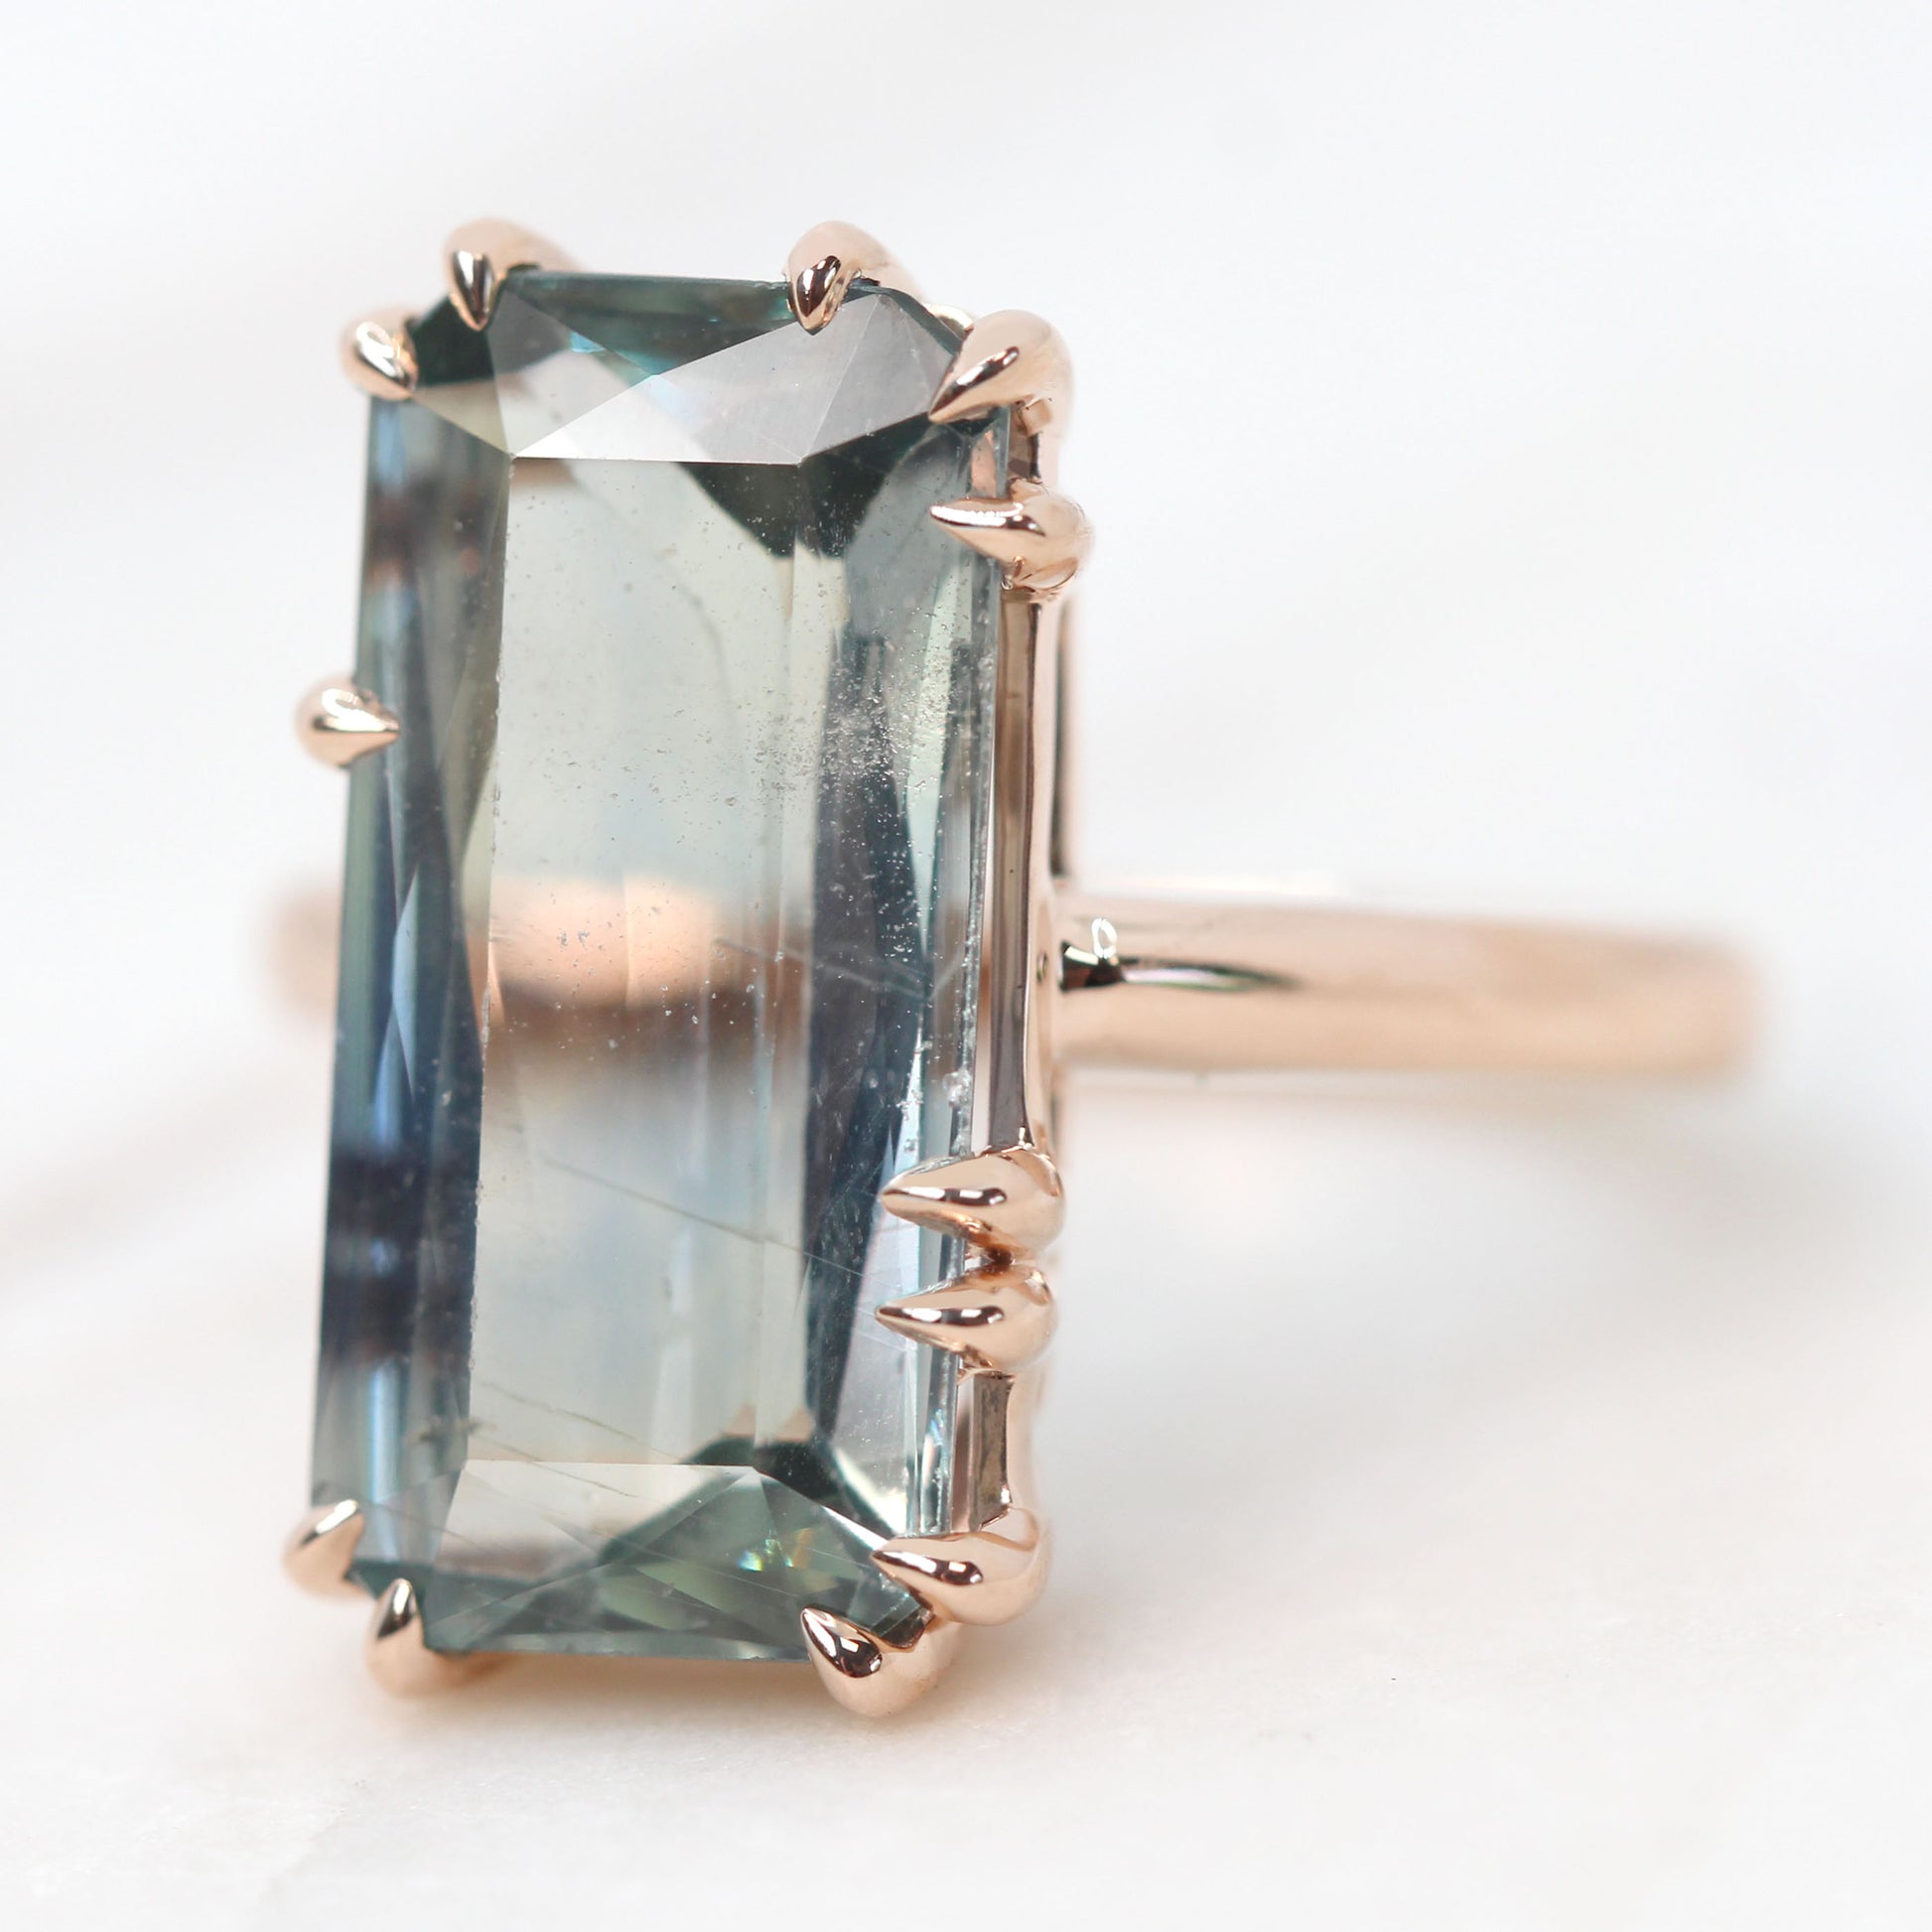 Elena Ring with a 10.75 Carat Emerald Cut Green Blue Bi-Color Sapphire in 14k Rose Gold - Ready to Size and Ship - Midwinter Co. Alternative Bridal Rings and Modern Fine Jewelry